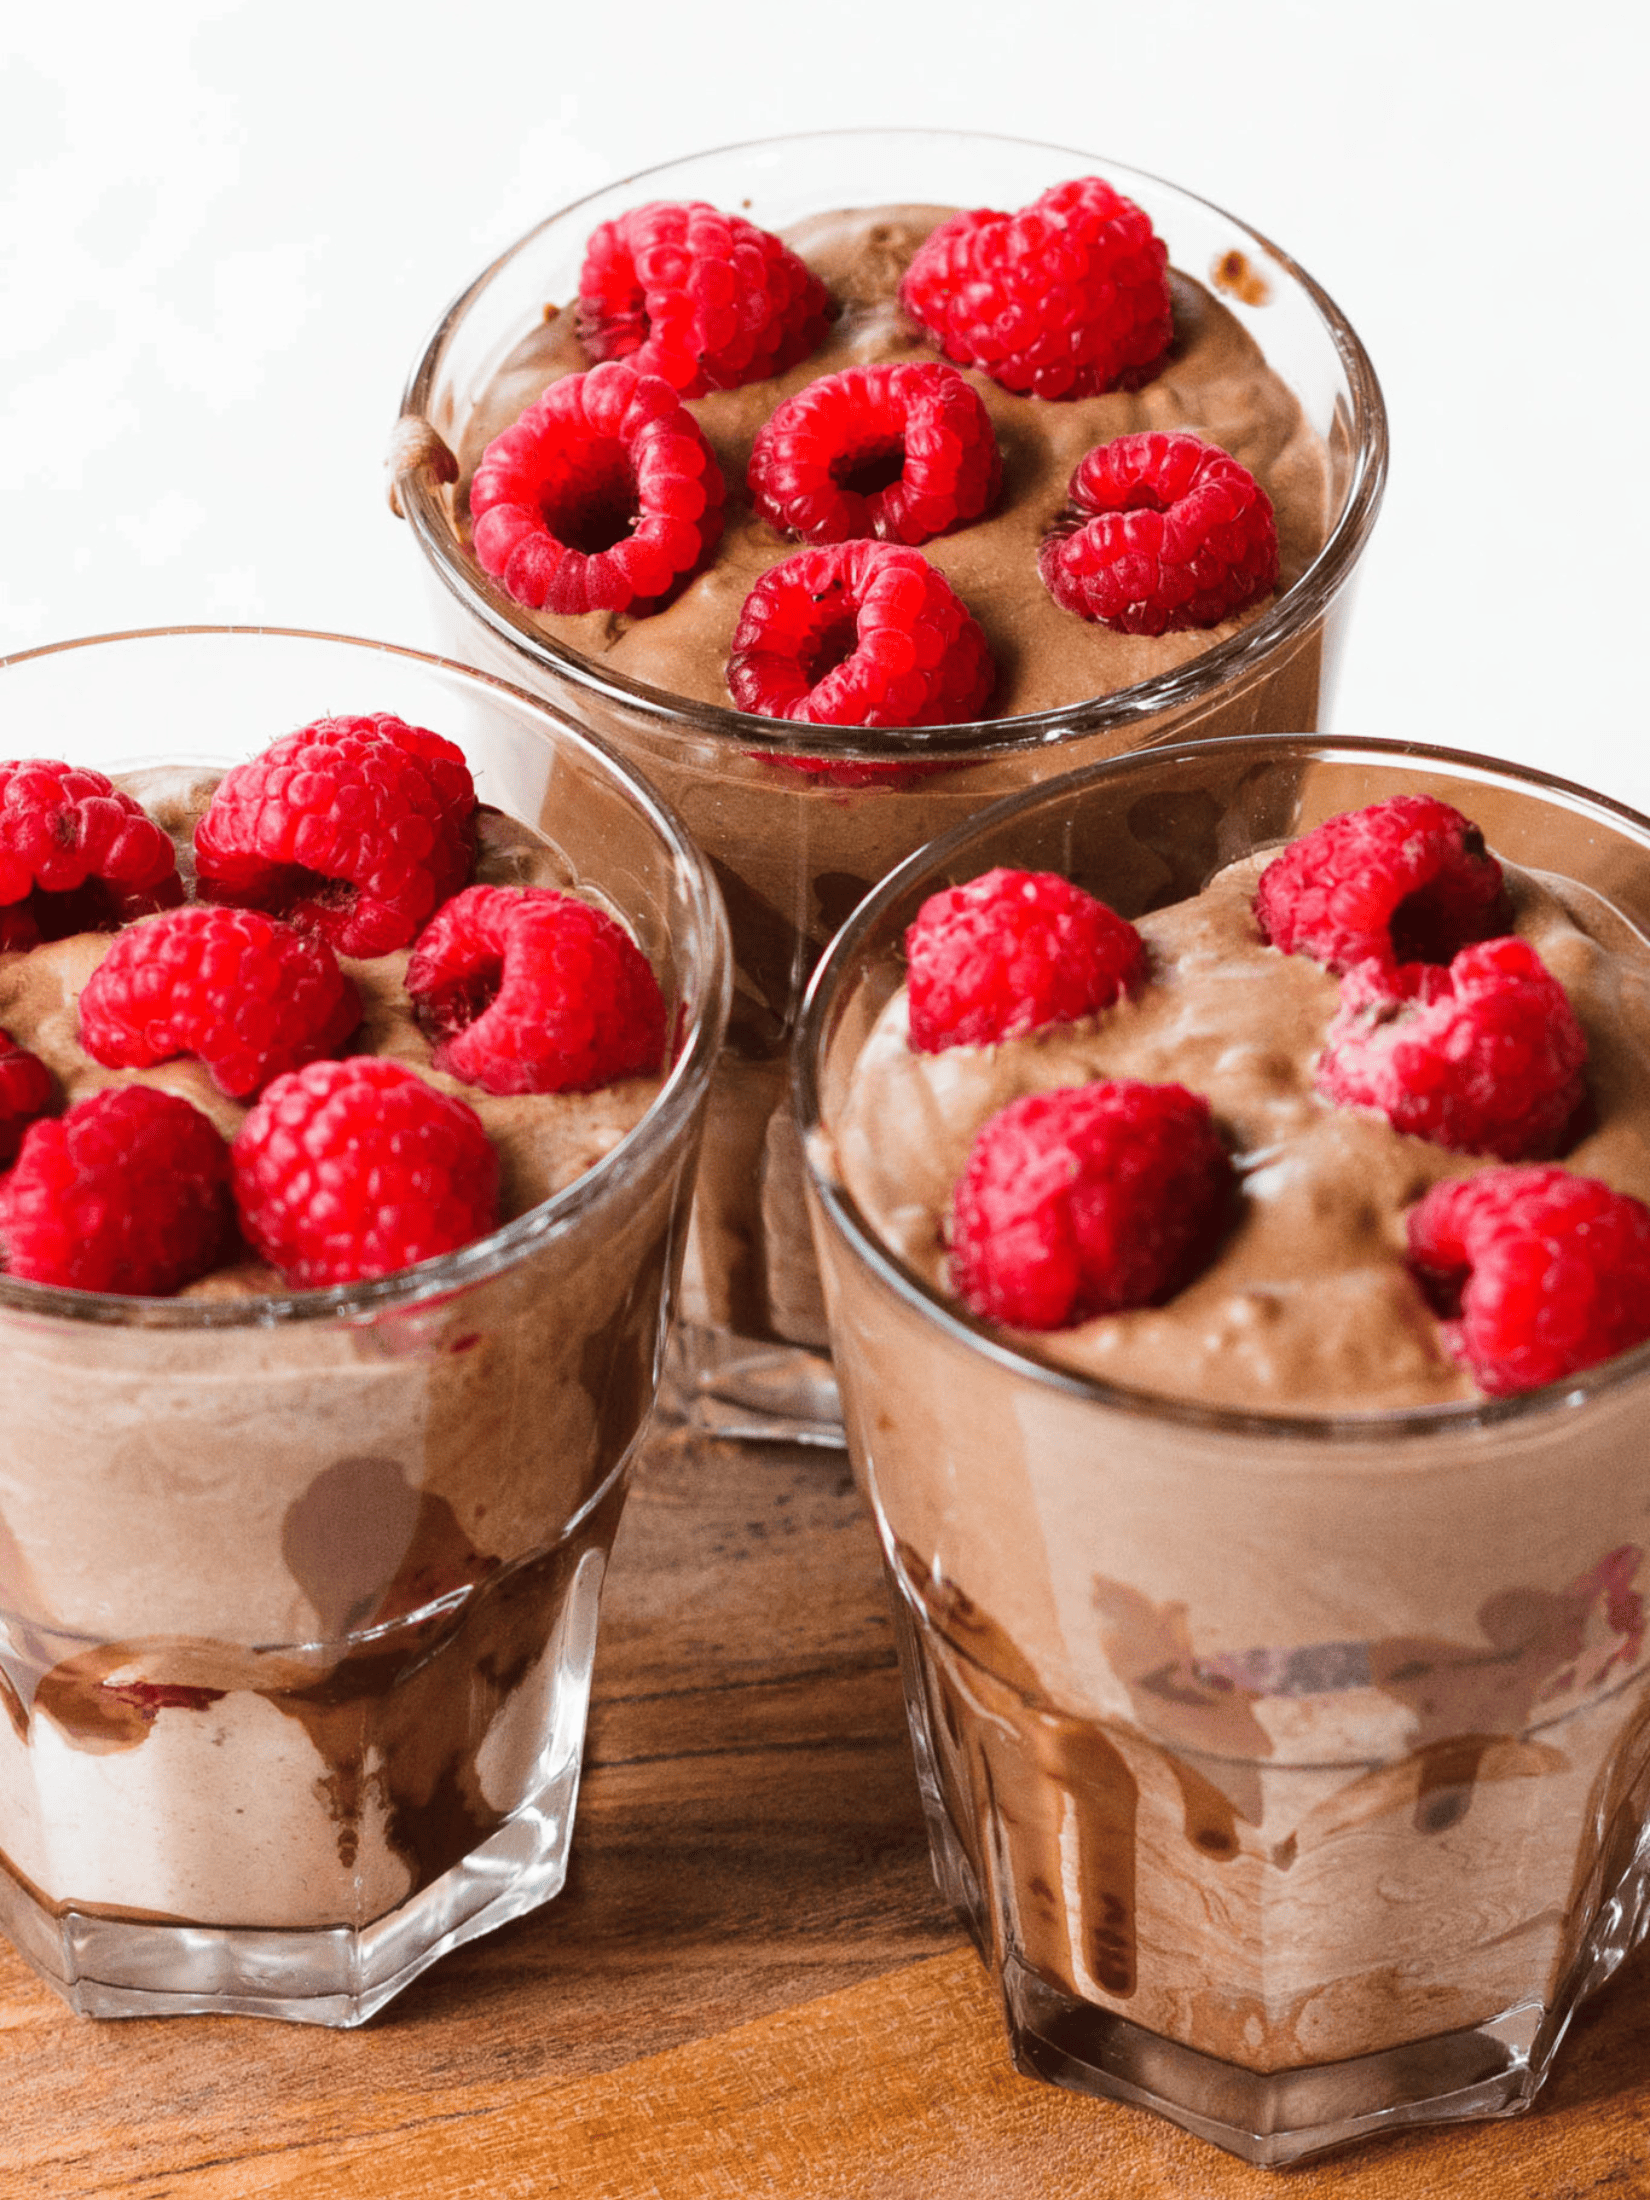 a tempting coconut chocolate pudding in a glass dessert dish, topped with some fresh raspberries.